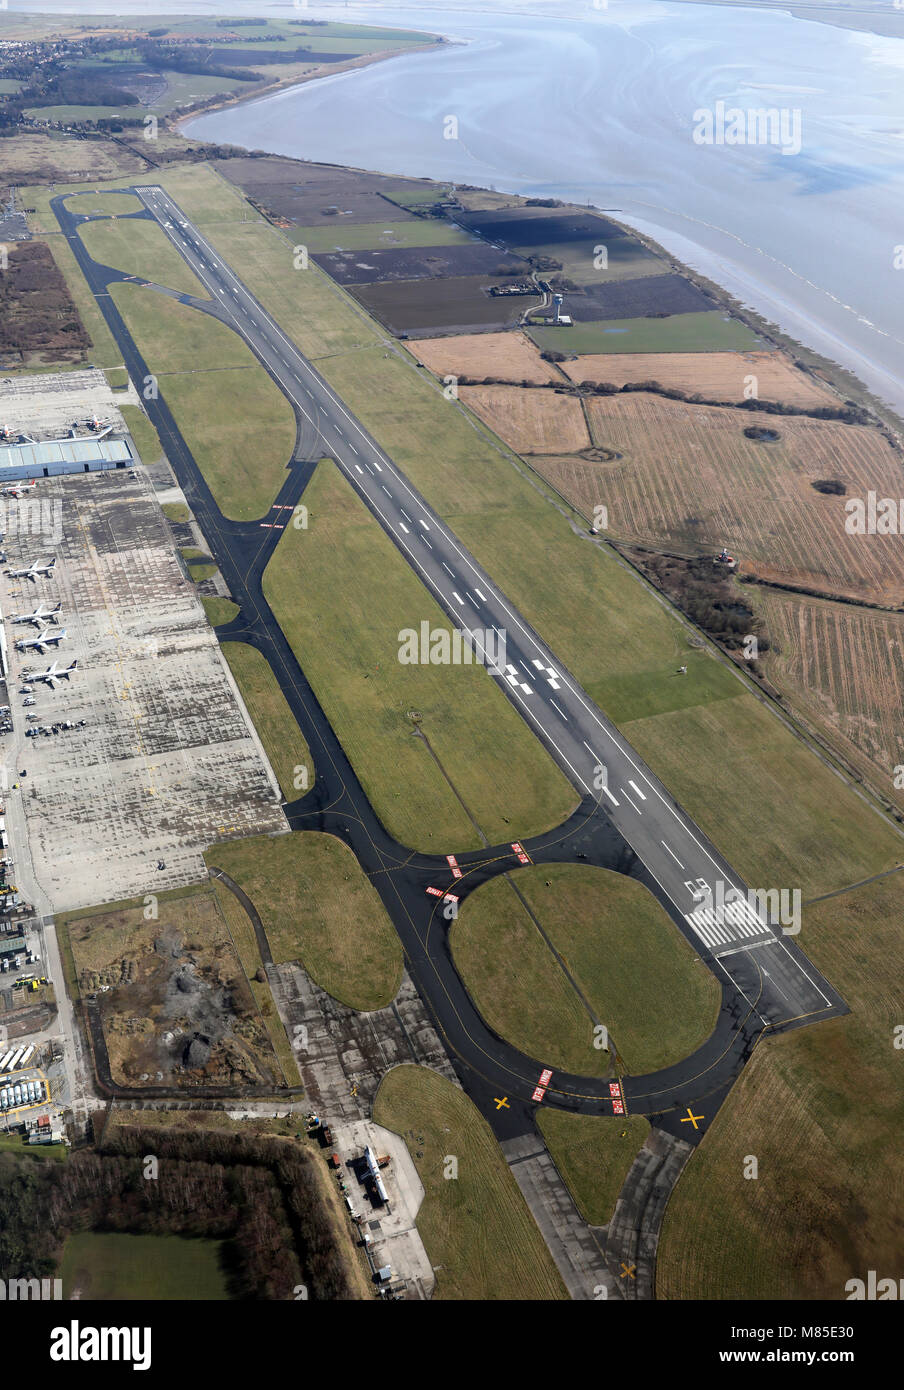 aerial view of the runway at Liverpool John Lennon Airport, UK Stock Photo